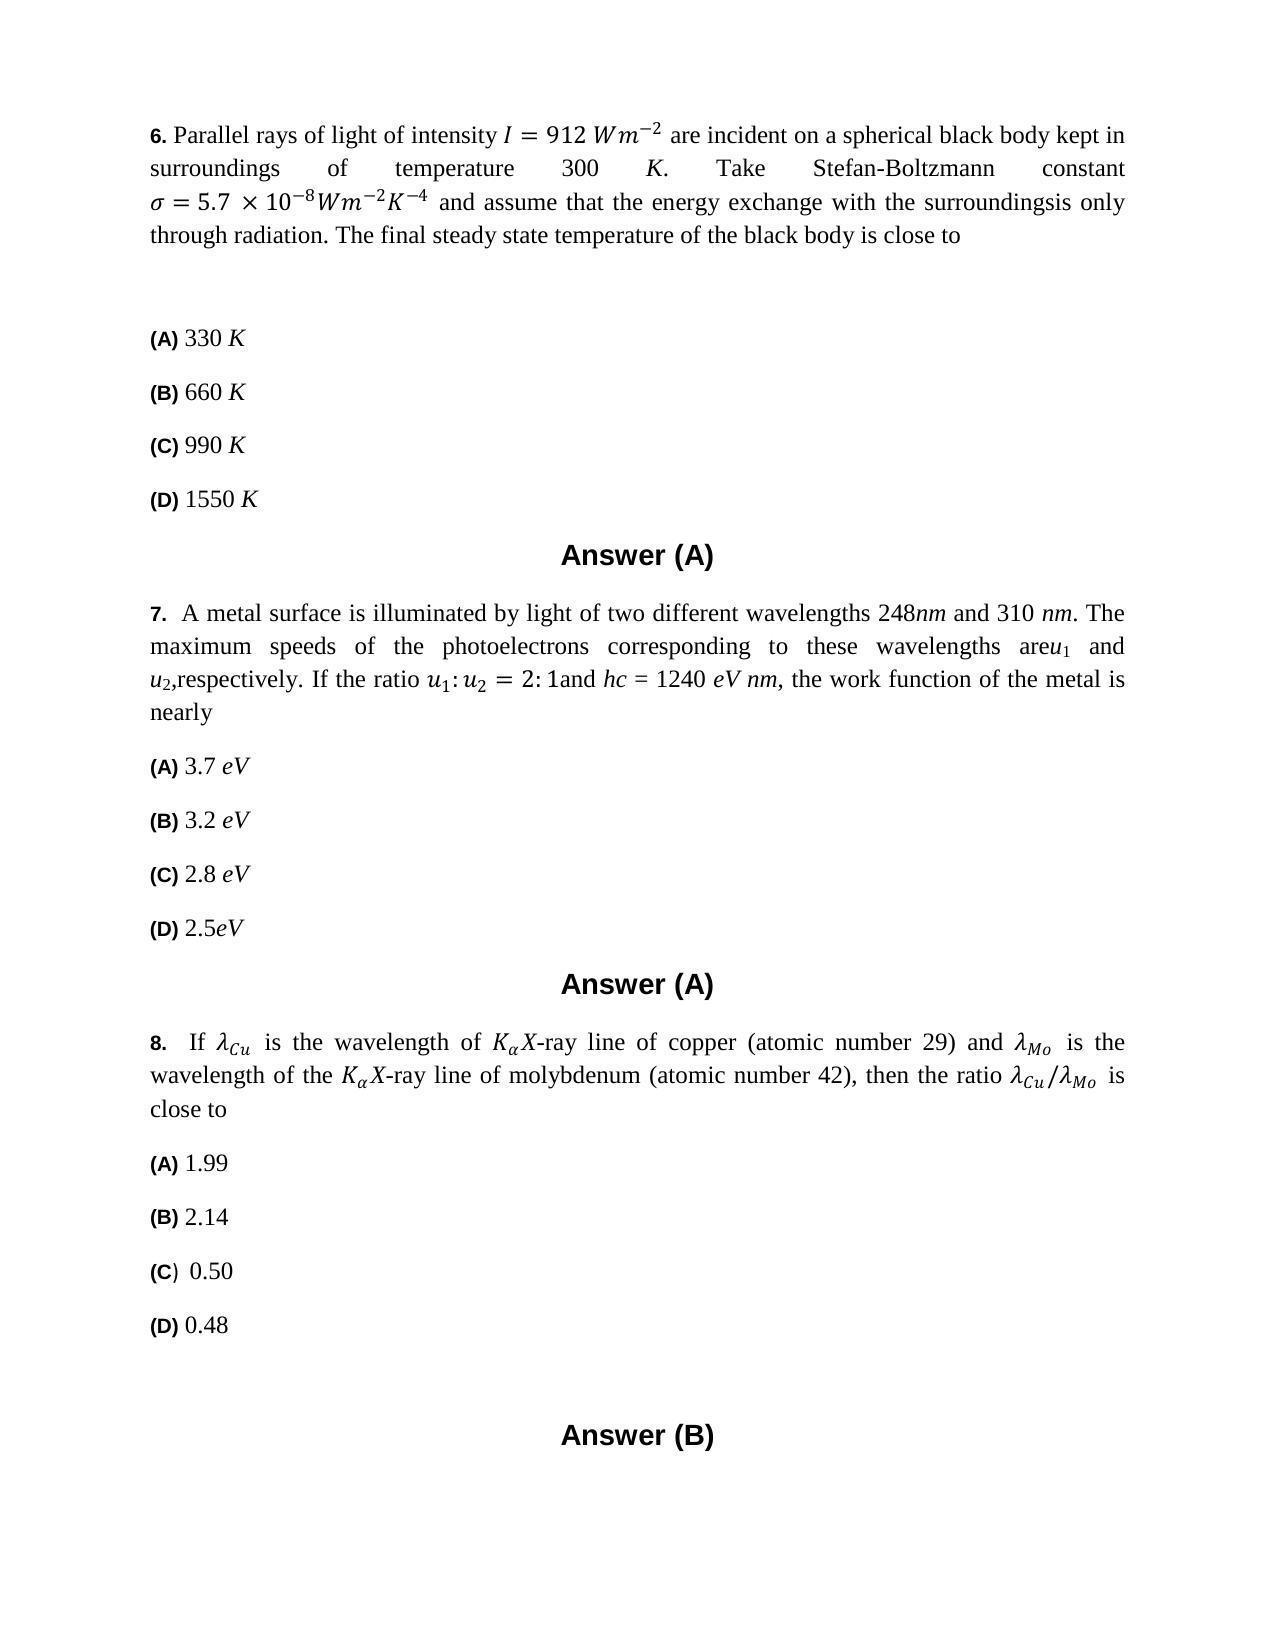 JEE (Advanced) 2014 Paper II Question Paper - Page 4